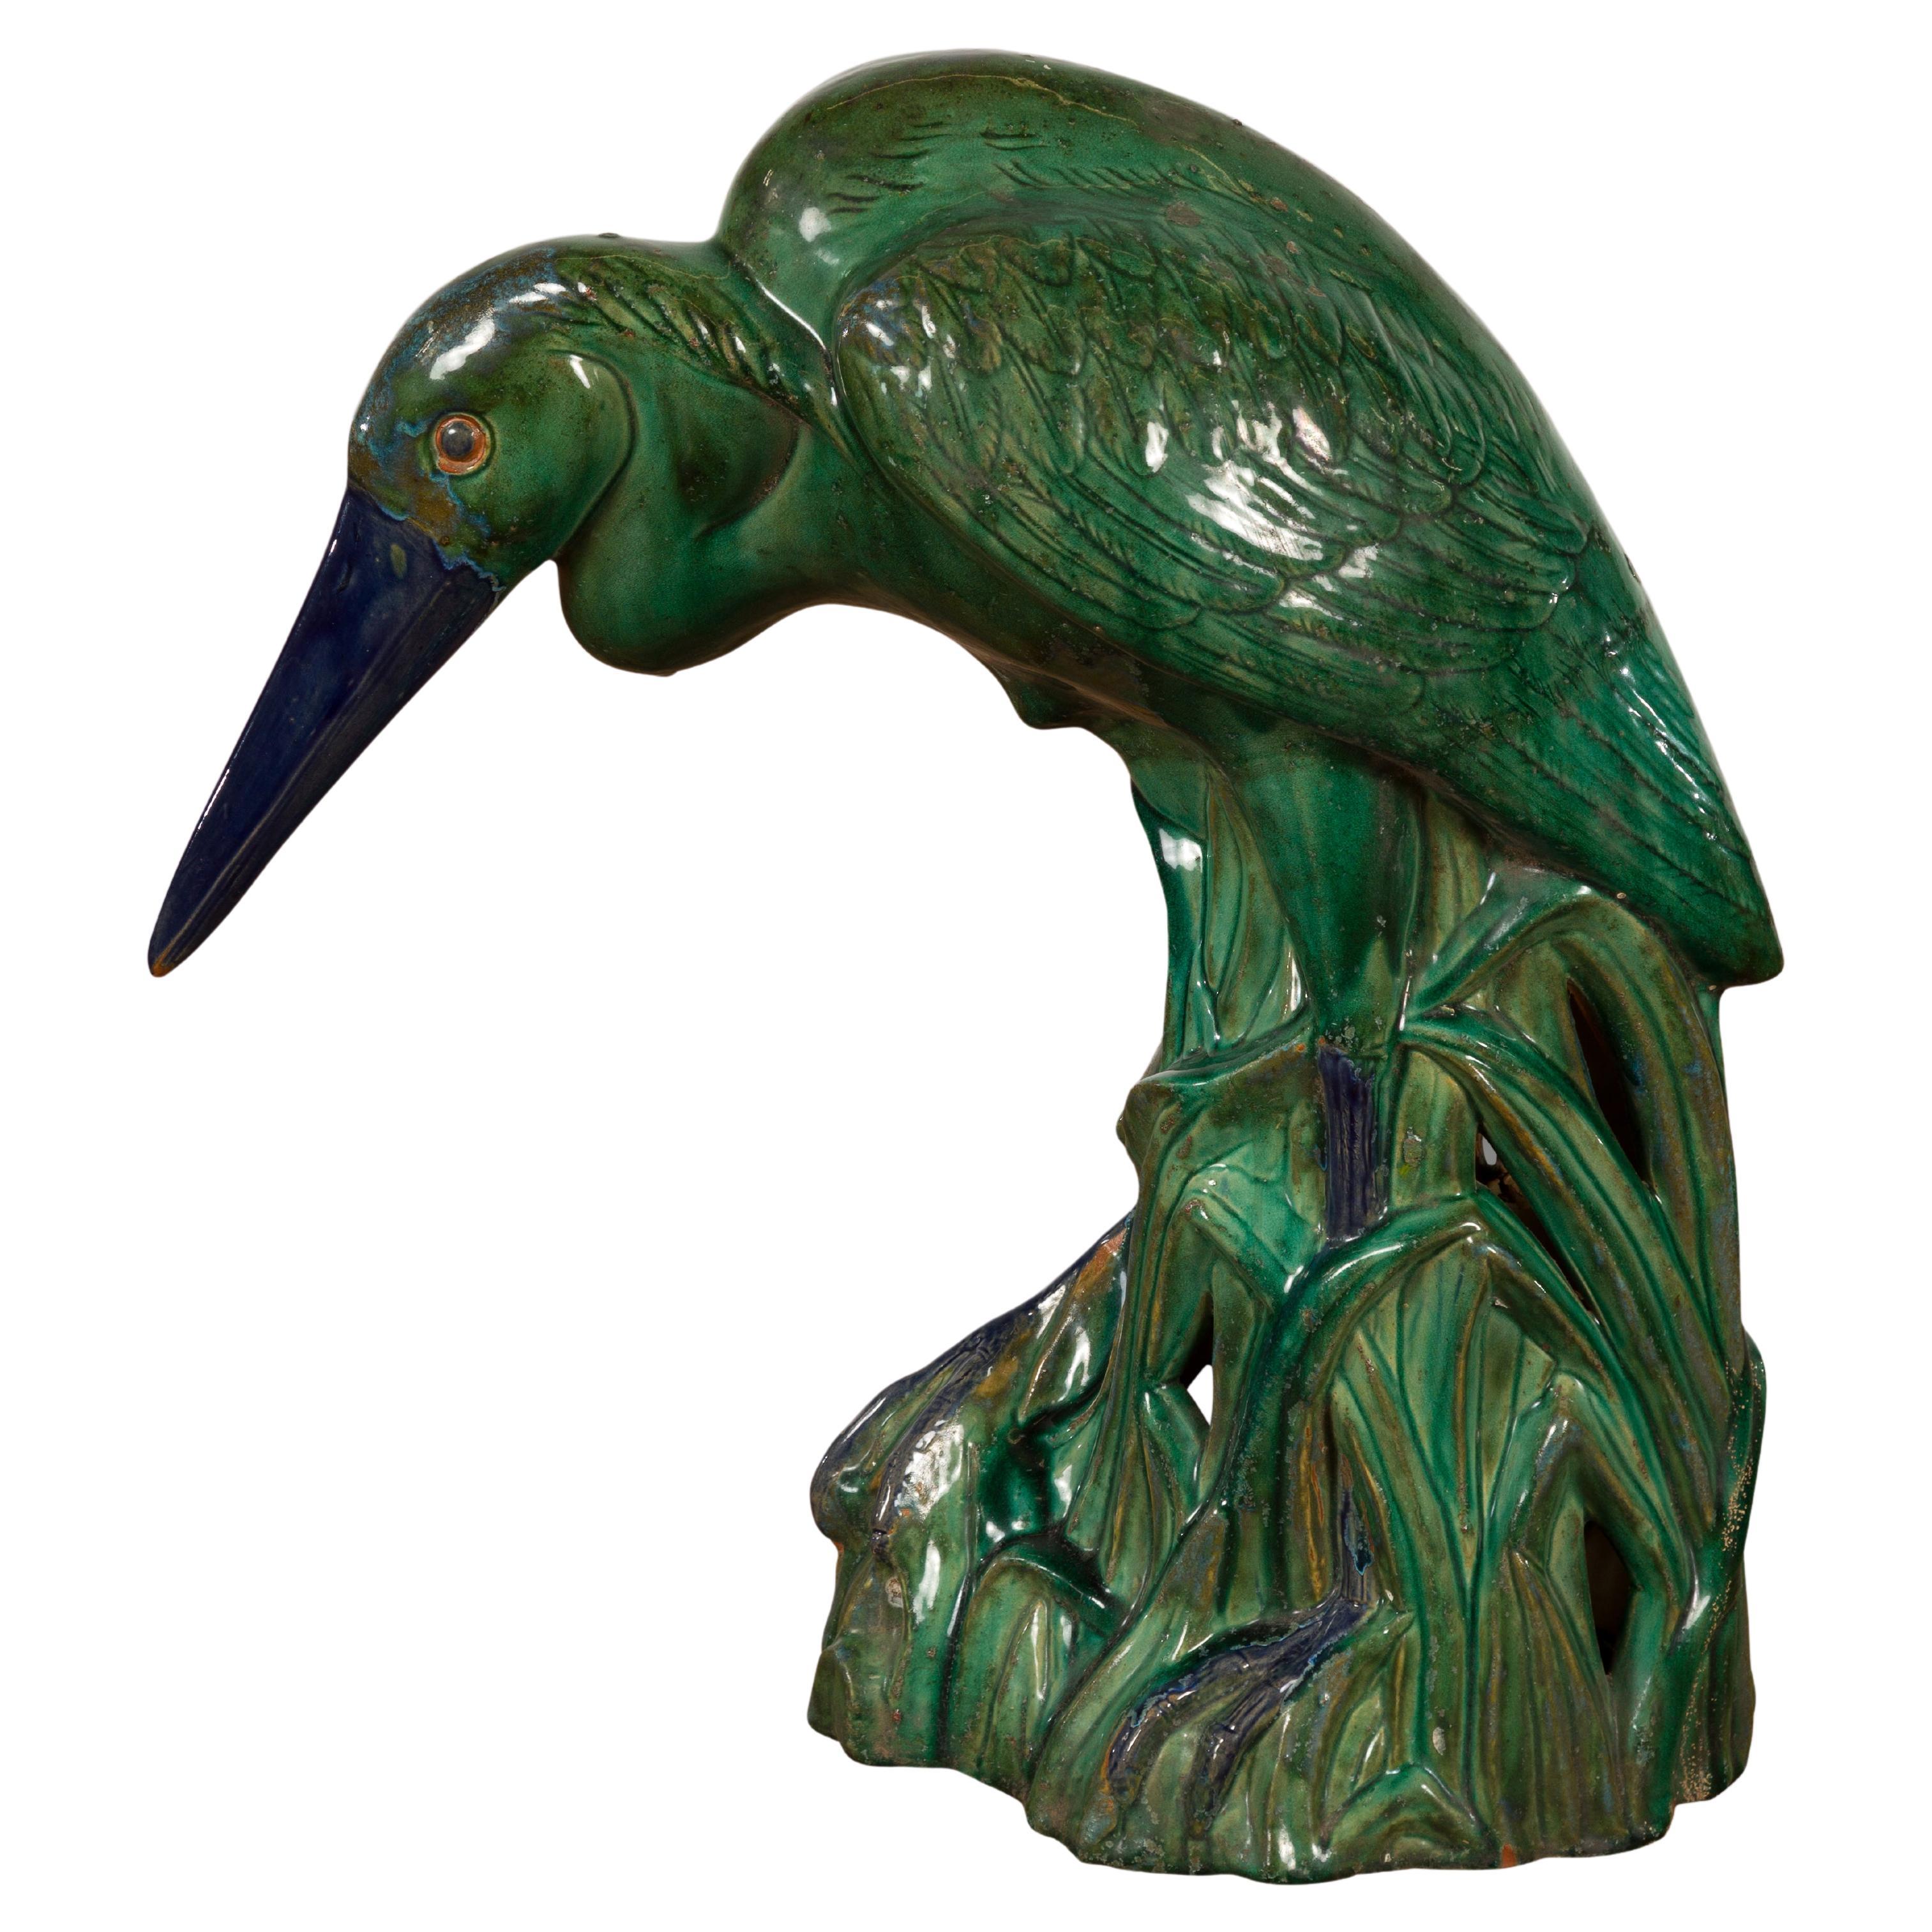 Lifesize Chinese Vintage Green and Blue Glazed Ceramic Heron Bird Sculpture For Sale